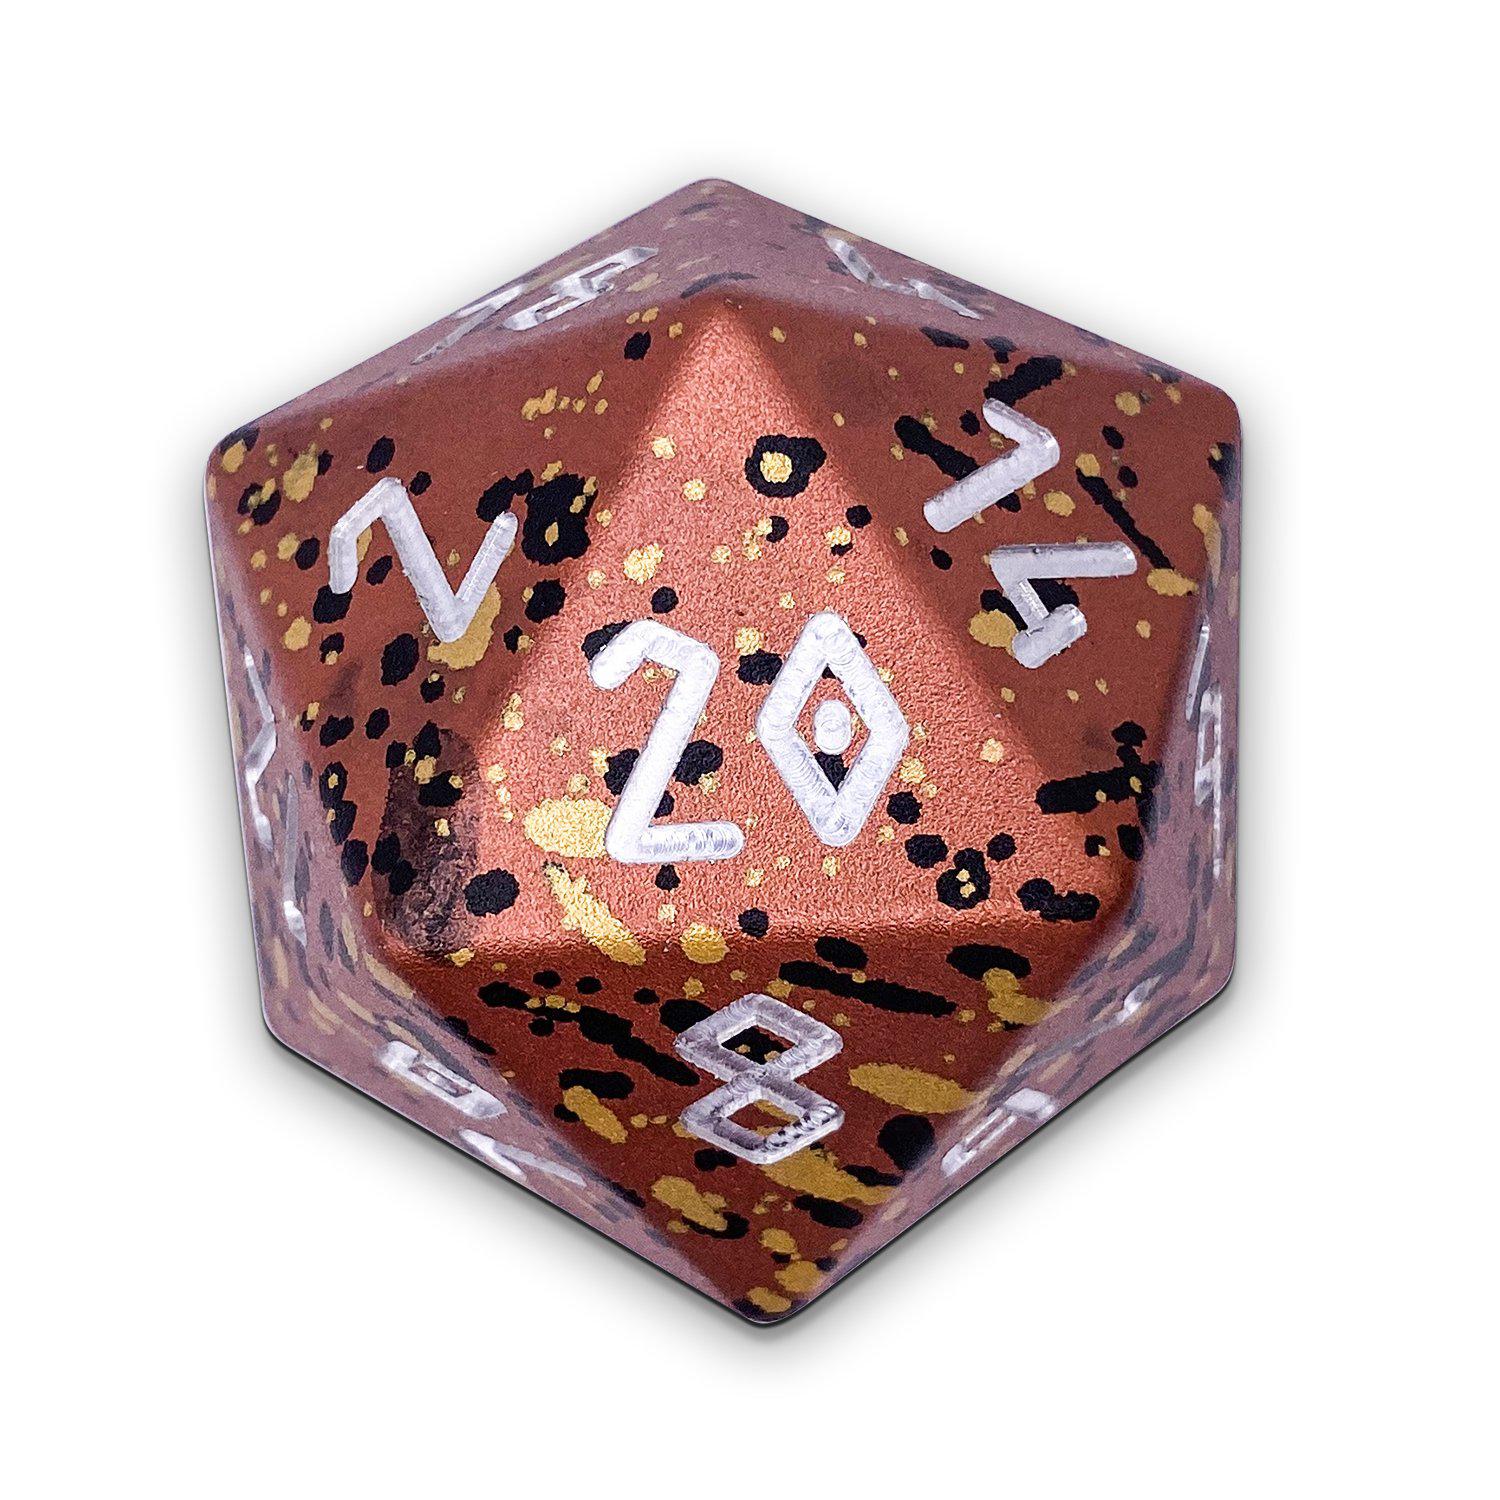 Single Wondrous Dice® D20 in Fire Elemental by Norse Foundry 6063 Aircraft Grade Aluminum - NOR 02403